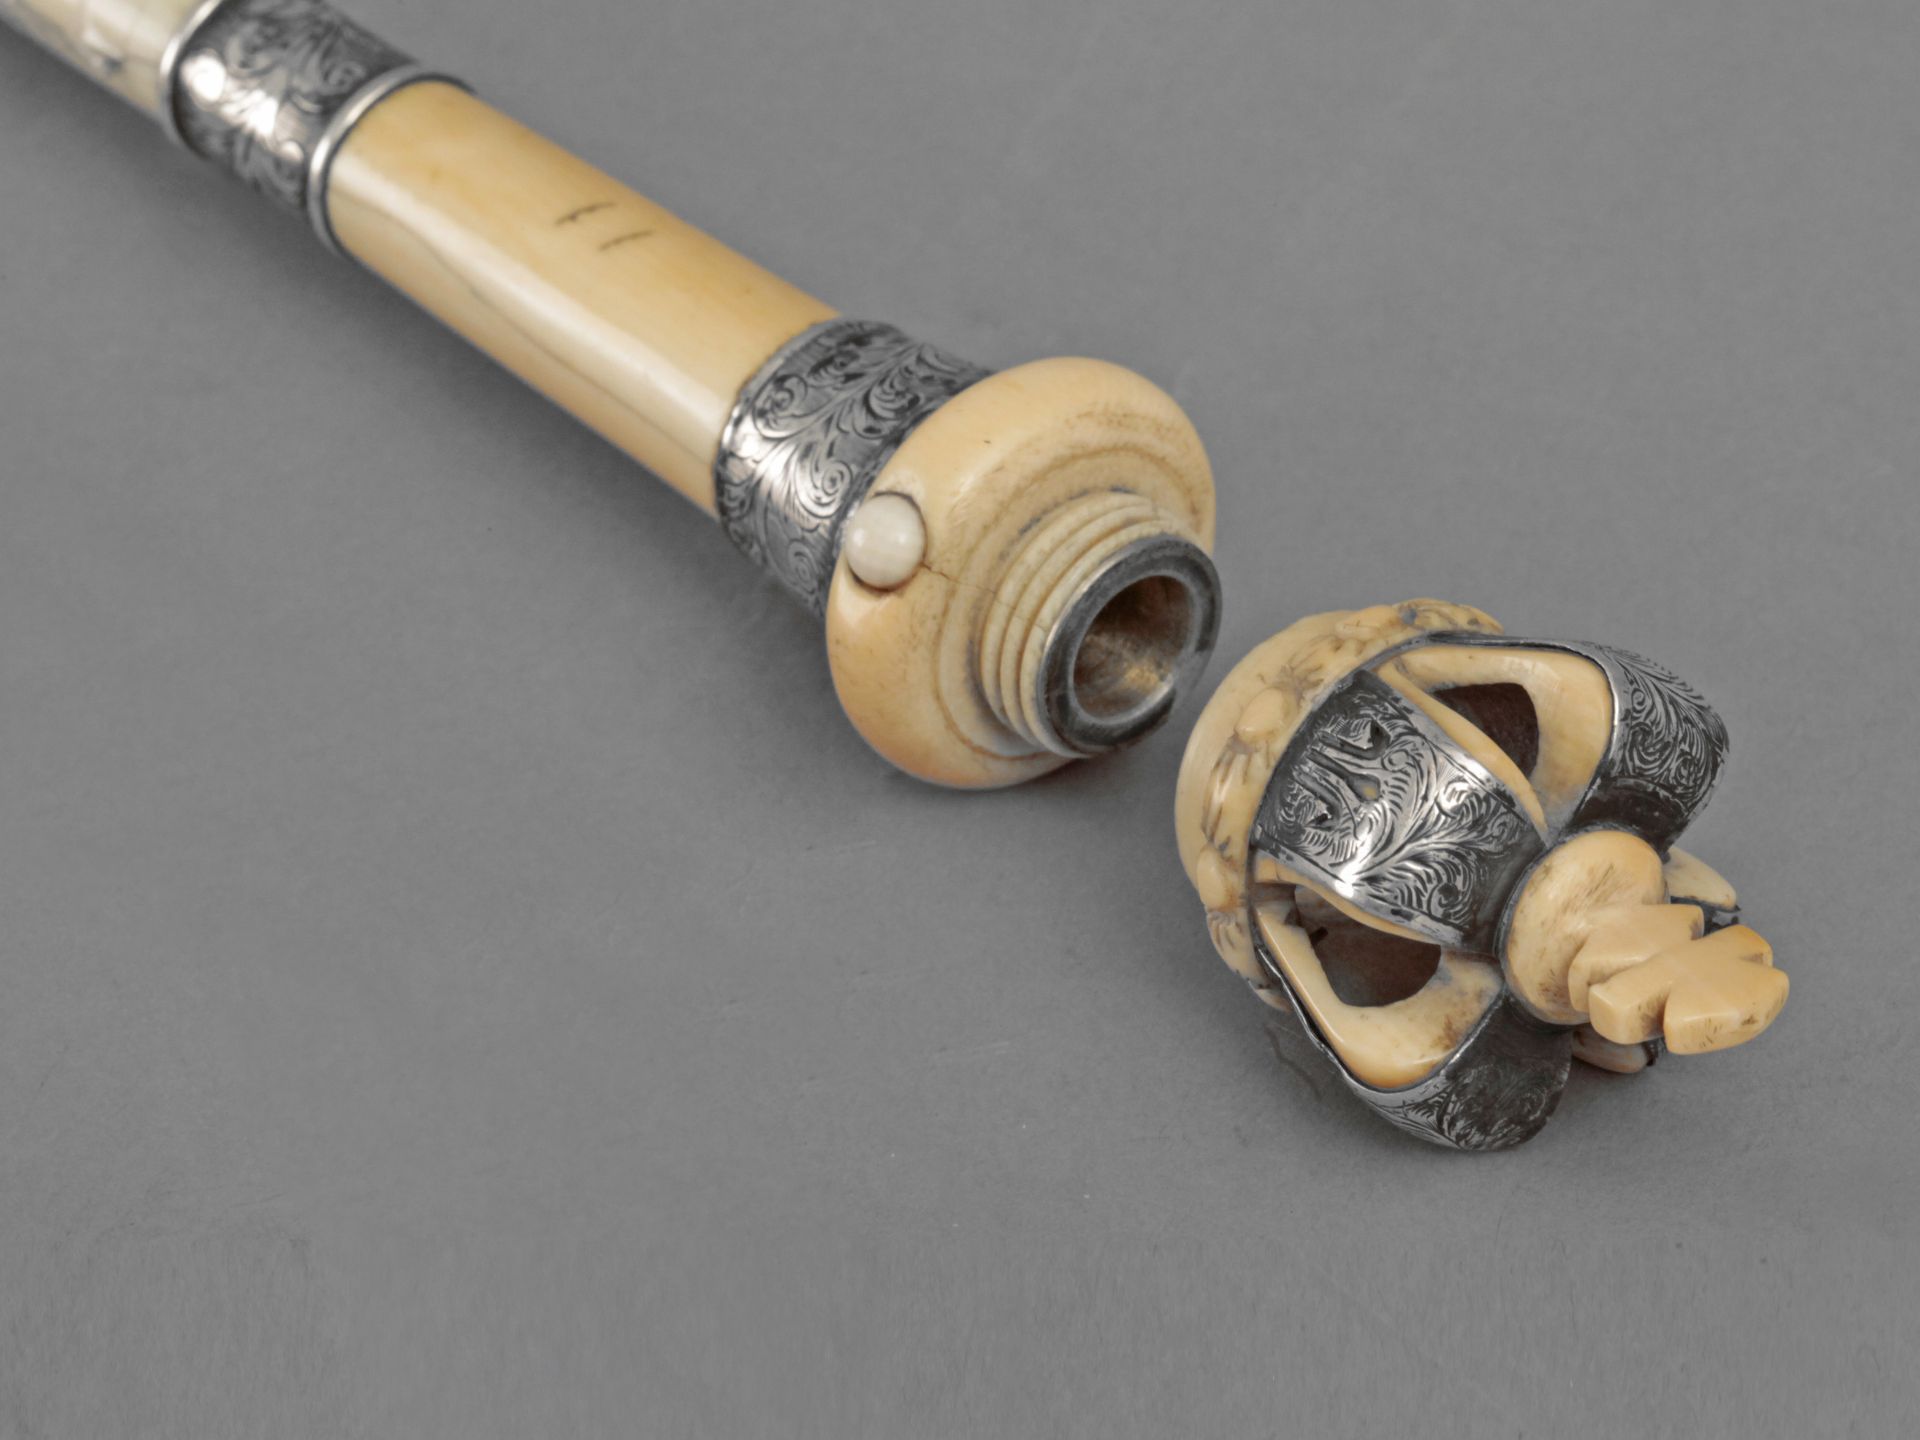 An English walking cane in carved ivory and silver circa 1887